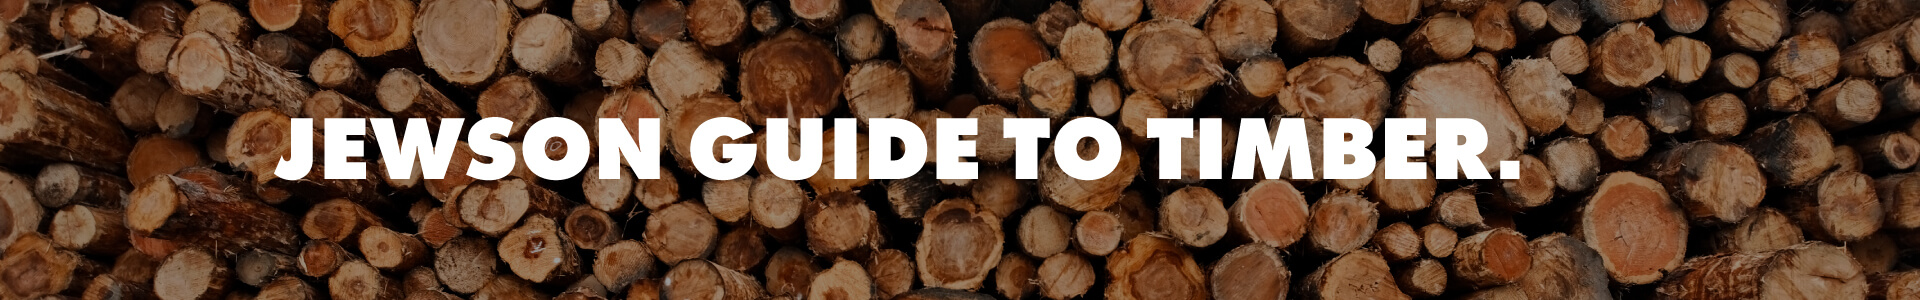 Timber Guide Banner 